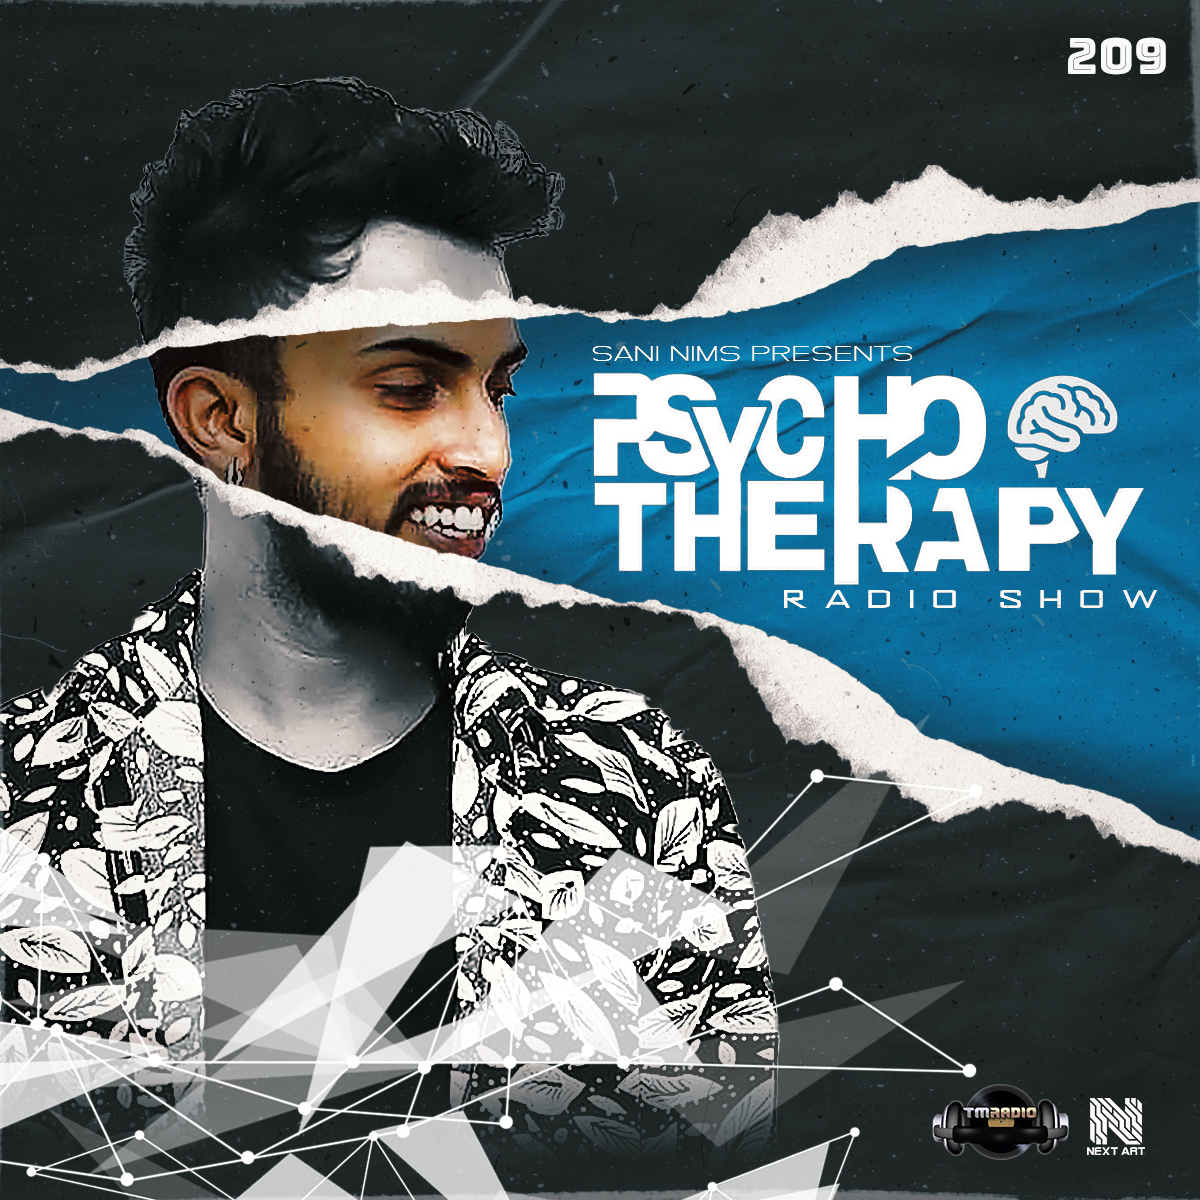 Psycho Therapy :: PSYCHO THERAPY EP 209 BY SANI NIMS ON TM RADIO (aired on October 5th) banner logo